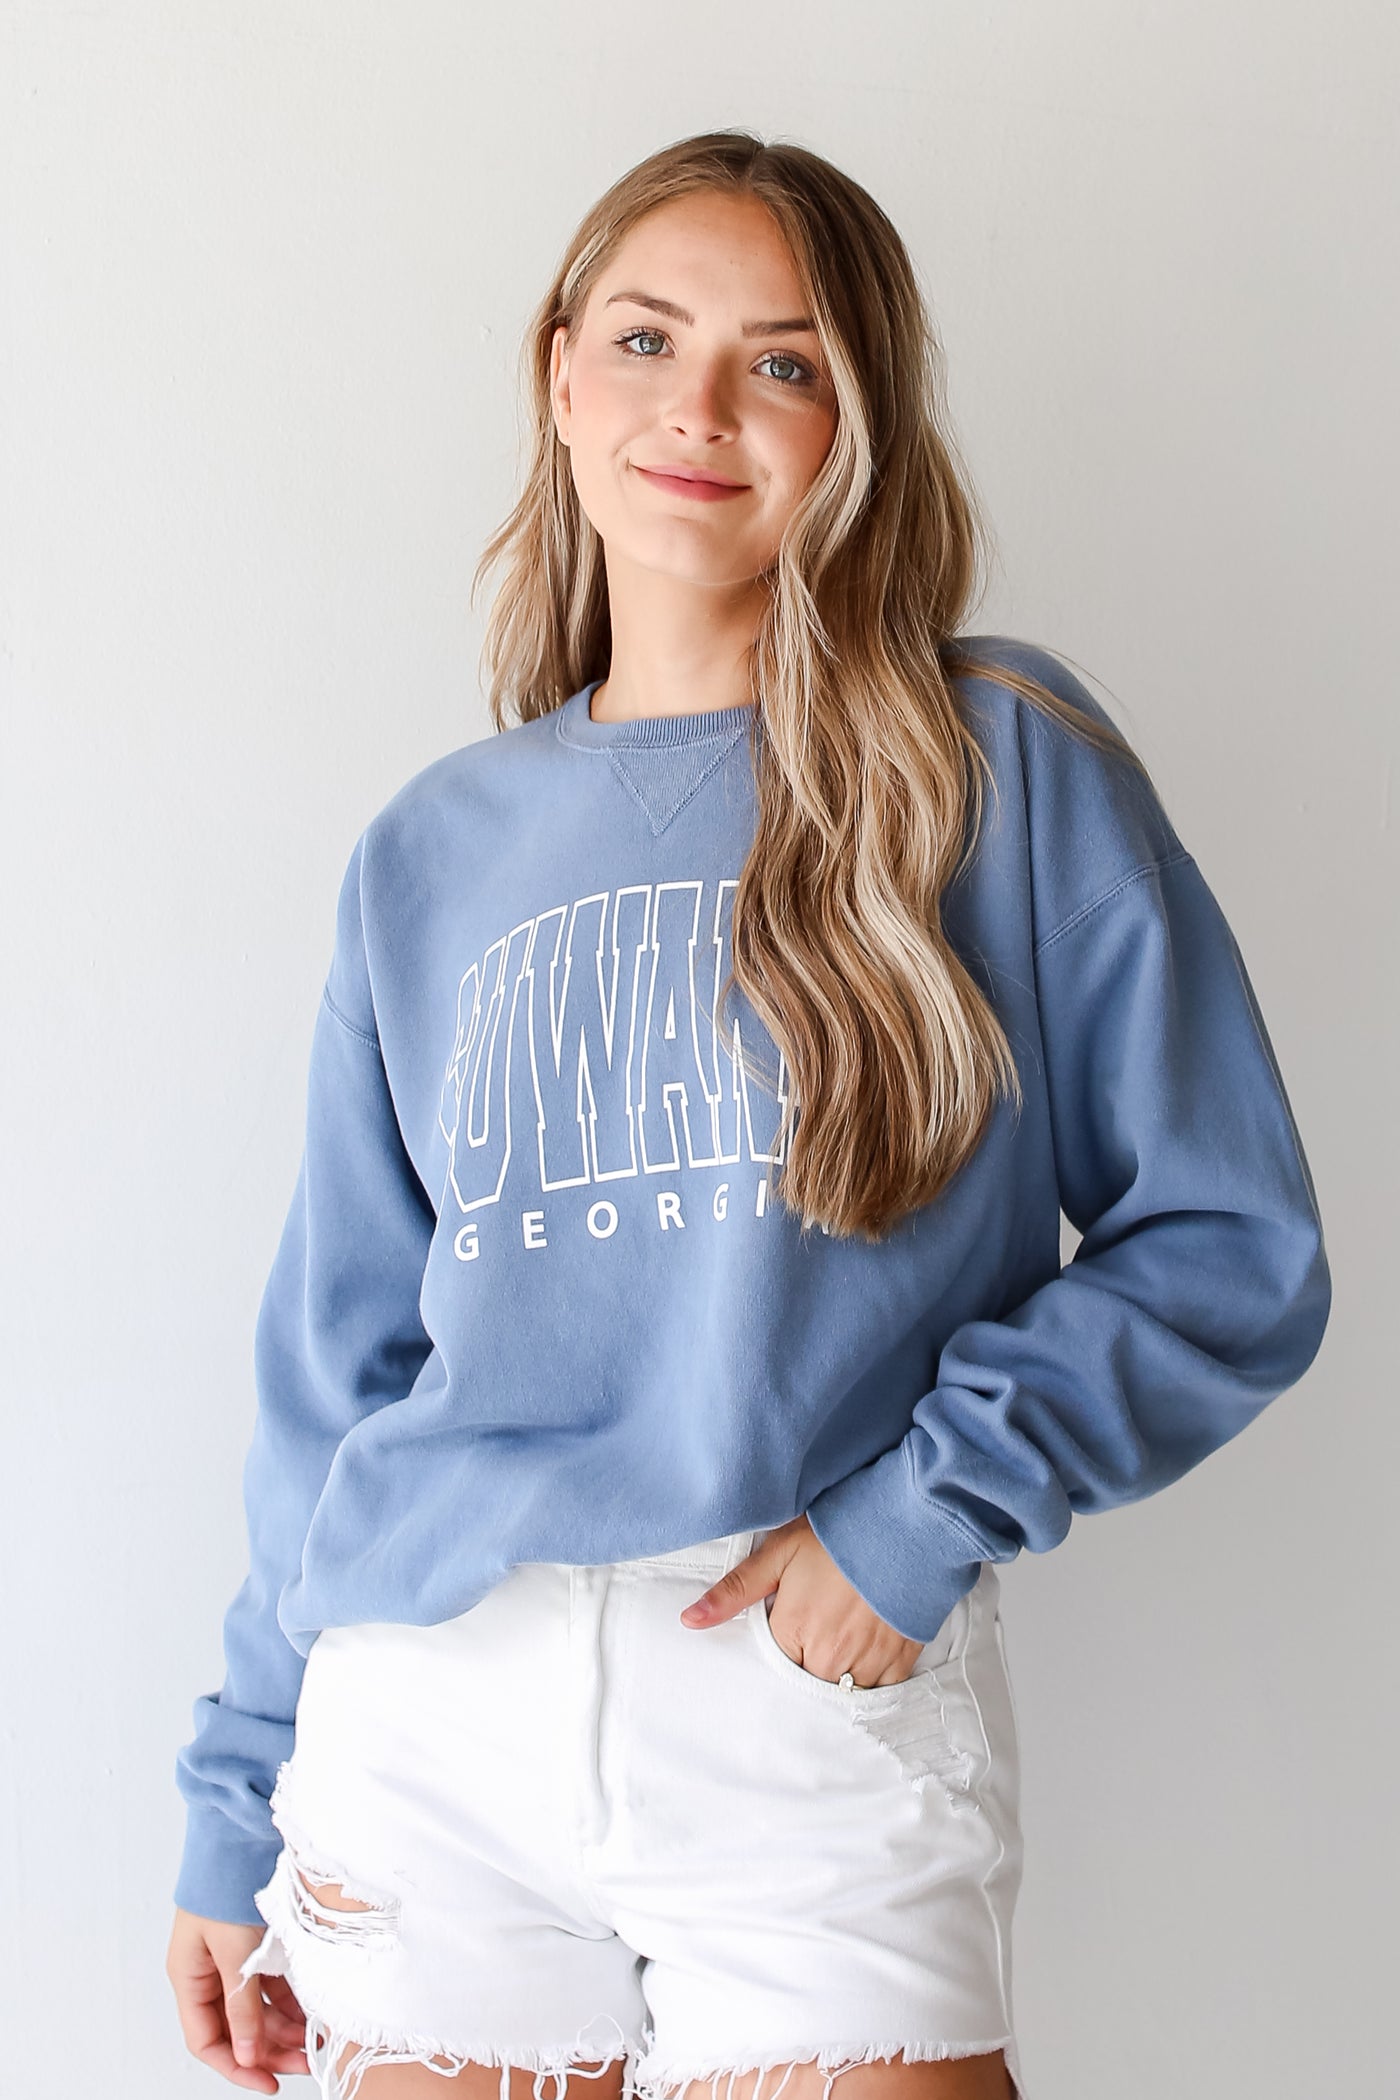 Light Blue Suwanee Georgia Pullover front view